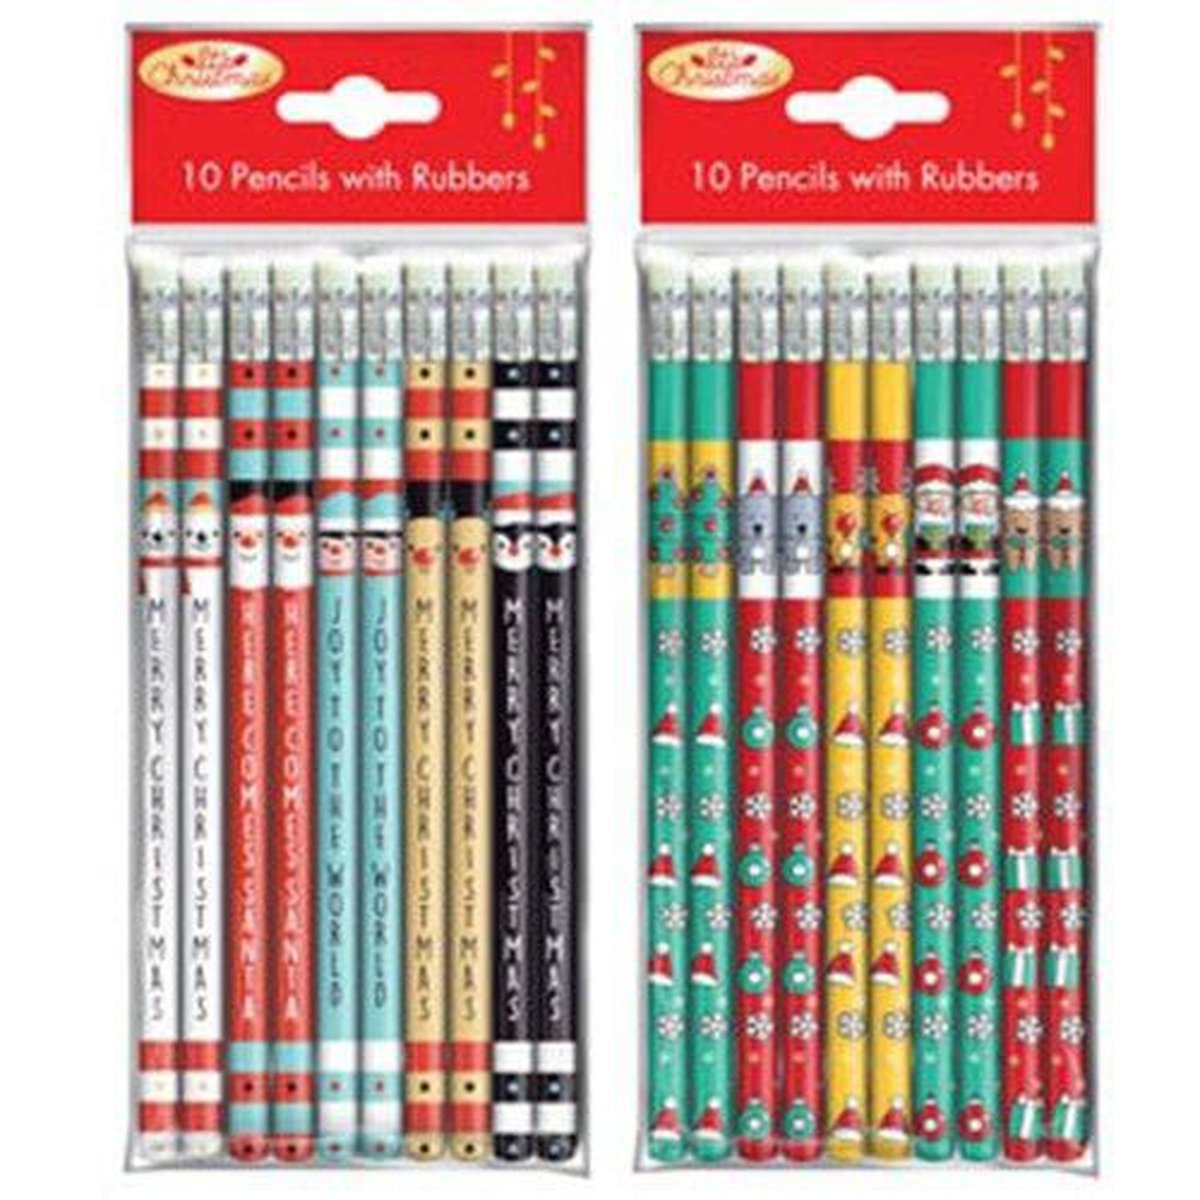 Xmas Pencils Pack of 10 With Rubbers - Kids Party Craft